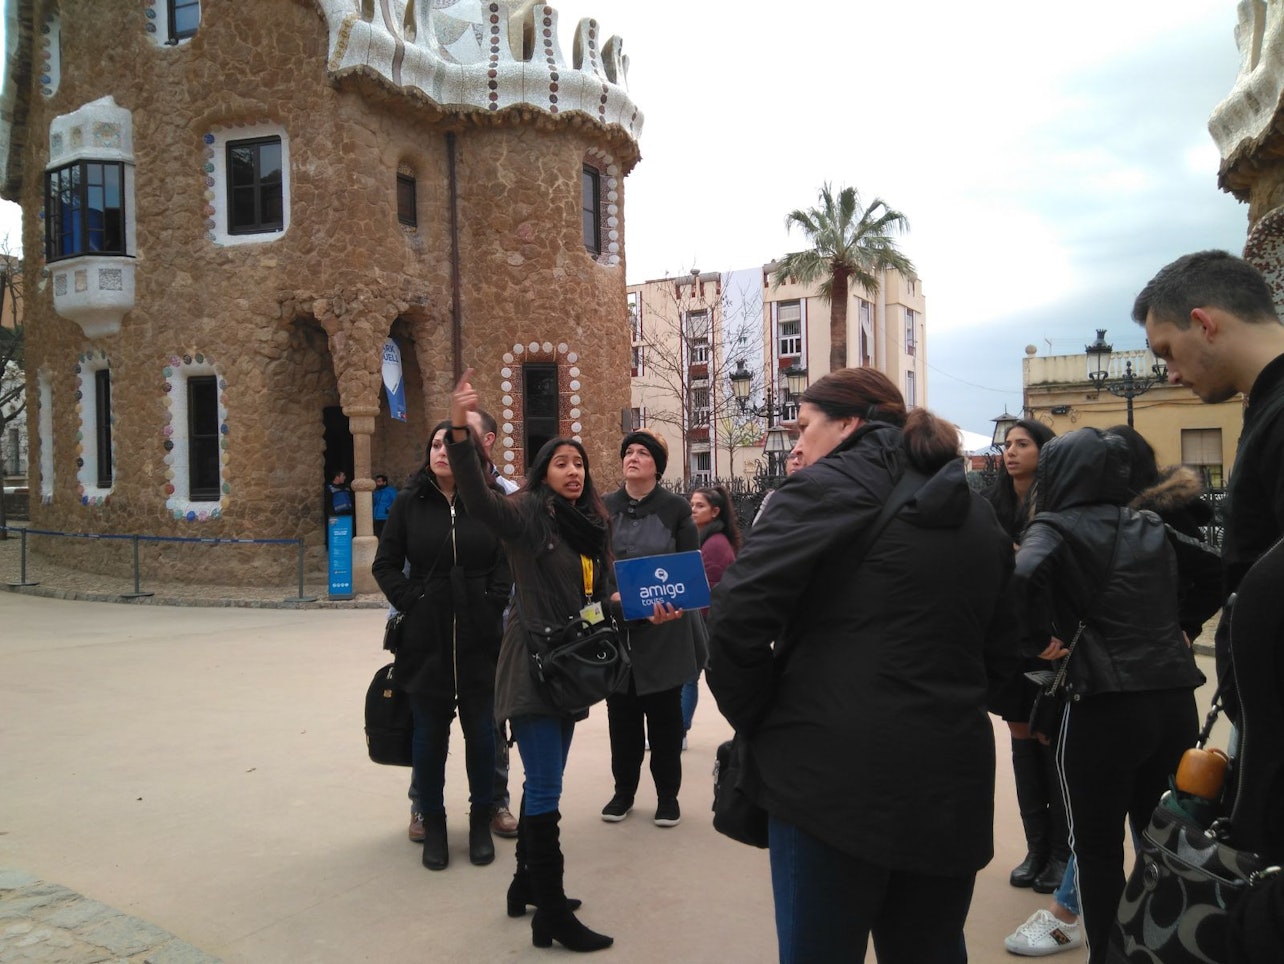 Park Güell: Skip The Line + Guided Tour - Accommodations in Barcelona